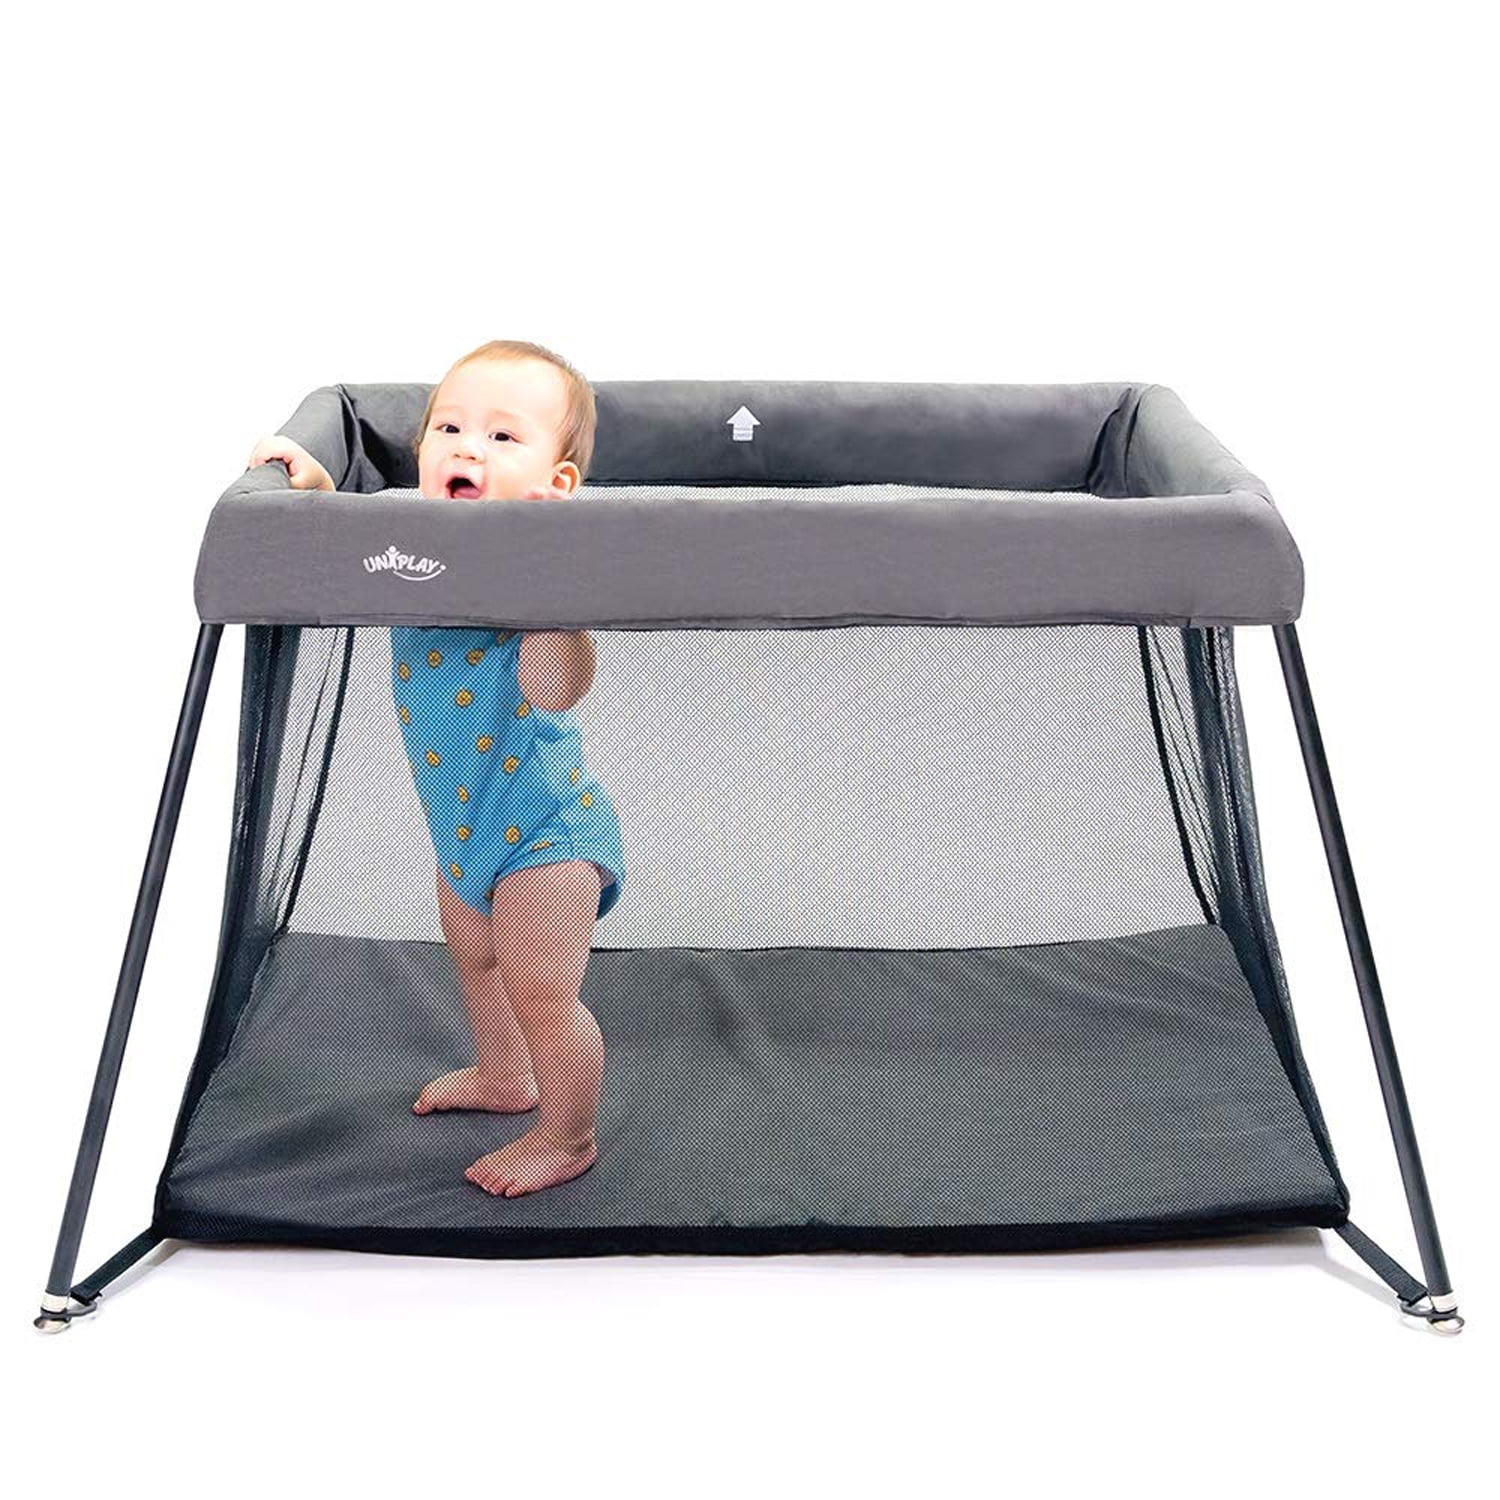 FUNNY SUPPLY 3-1 Baby Travel Crib Lightweight Travel Cot Easy to Pack-Yard with Mattress Sheet Portable